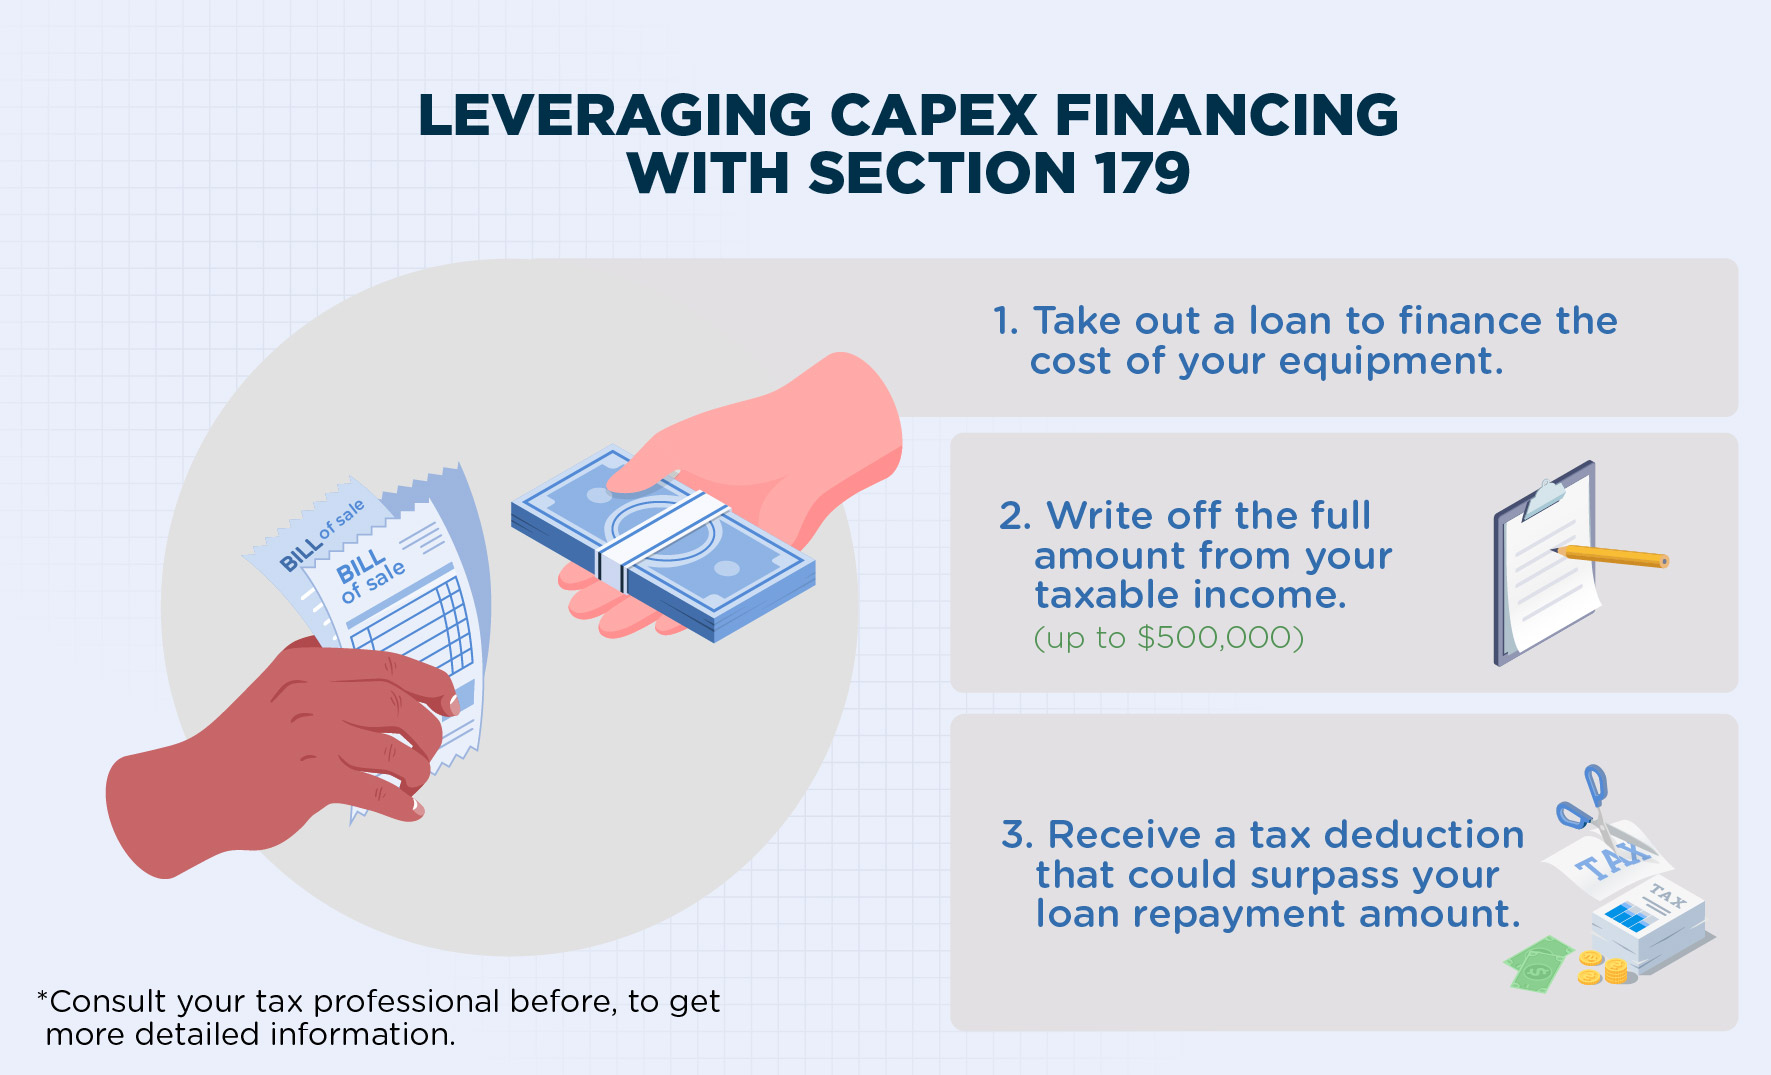 Leveraging Capex Financing with Section 179